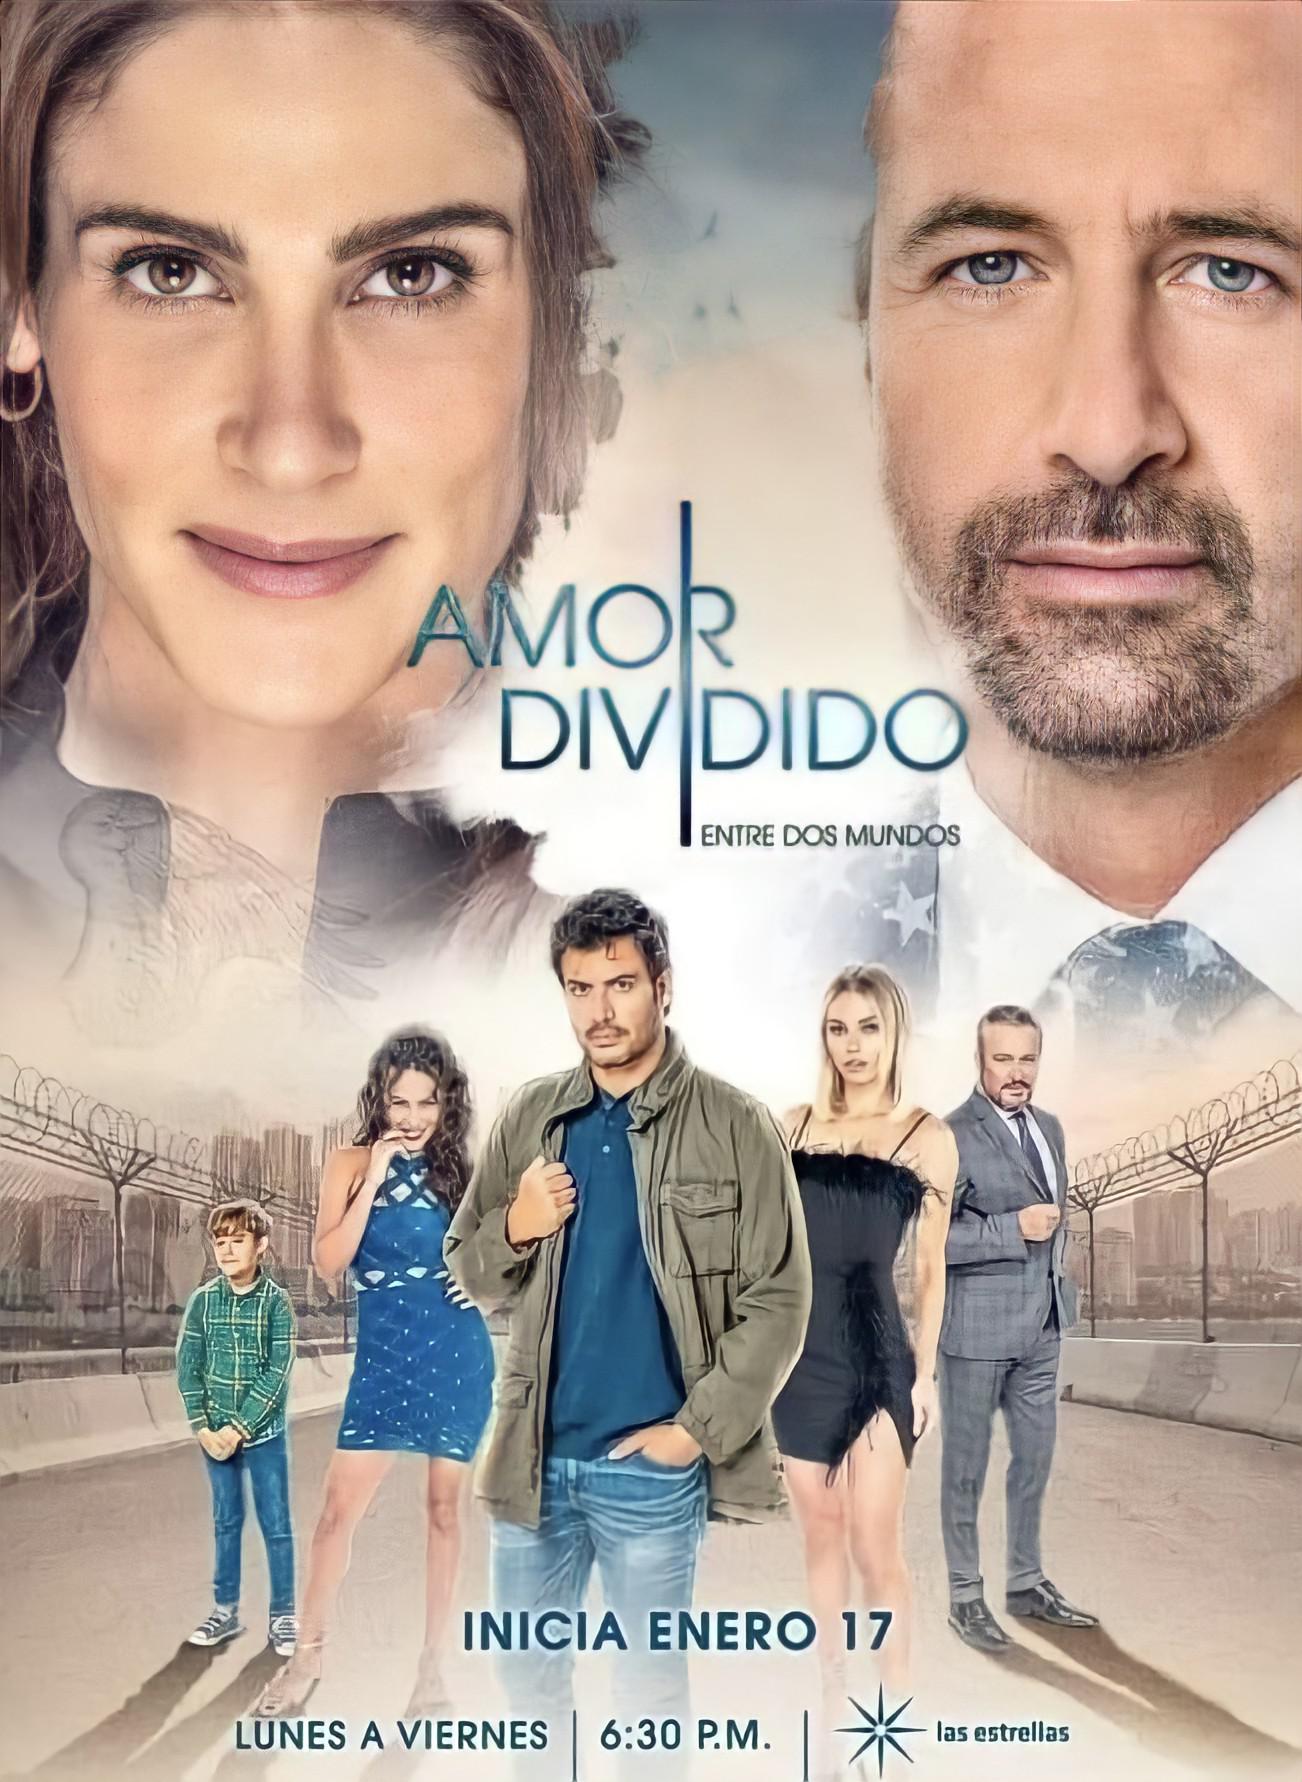 TV ratings for Amor Dividido in the United States. Las Estrellas TV series